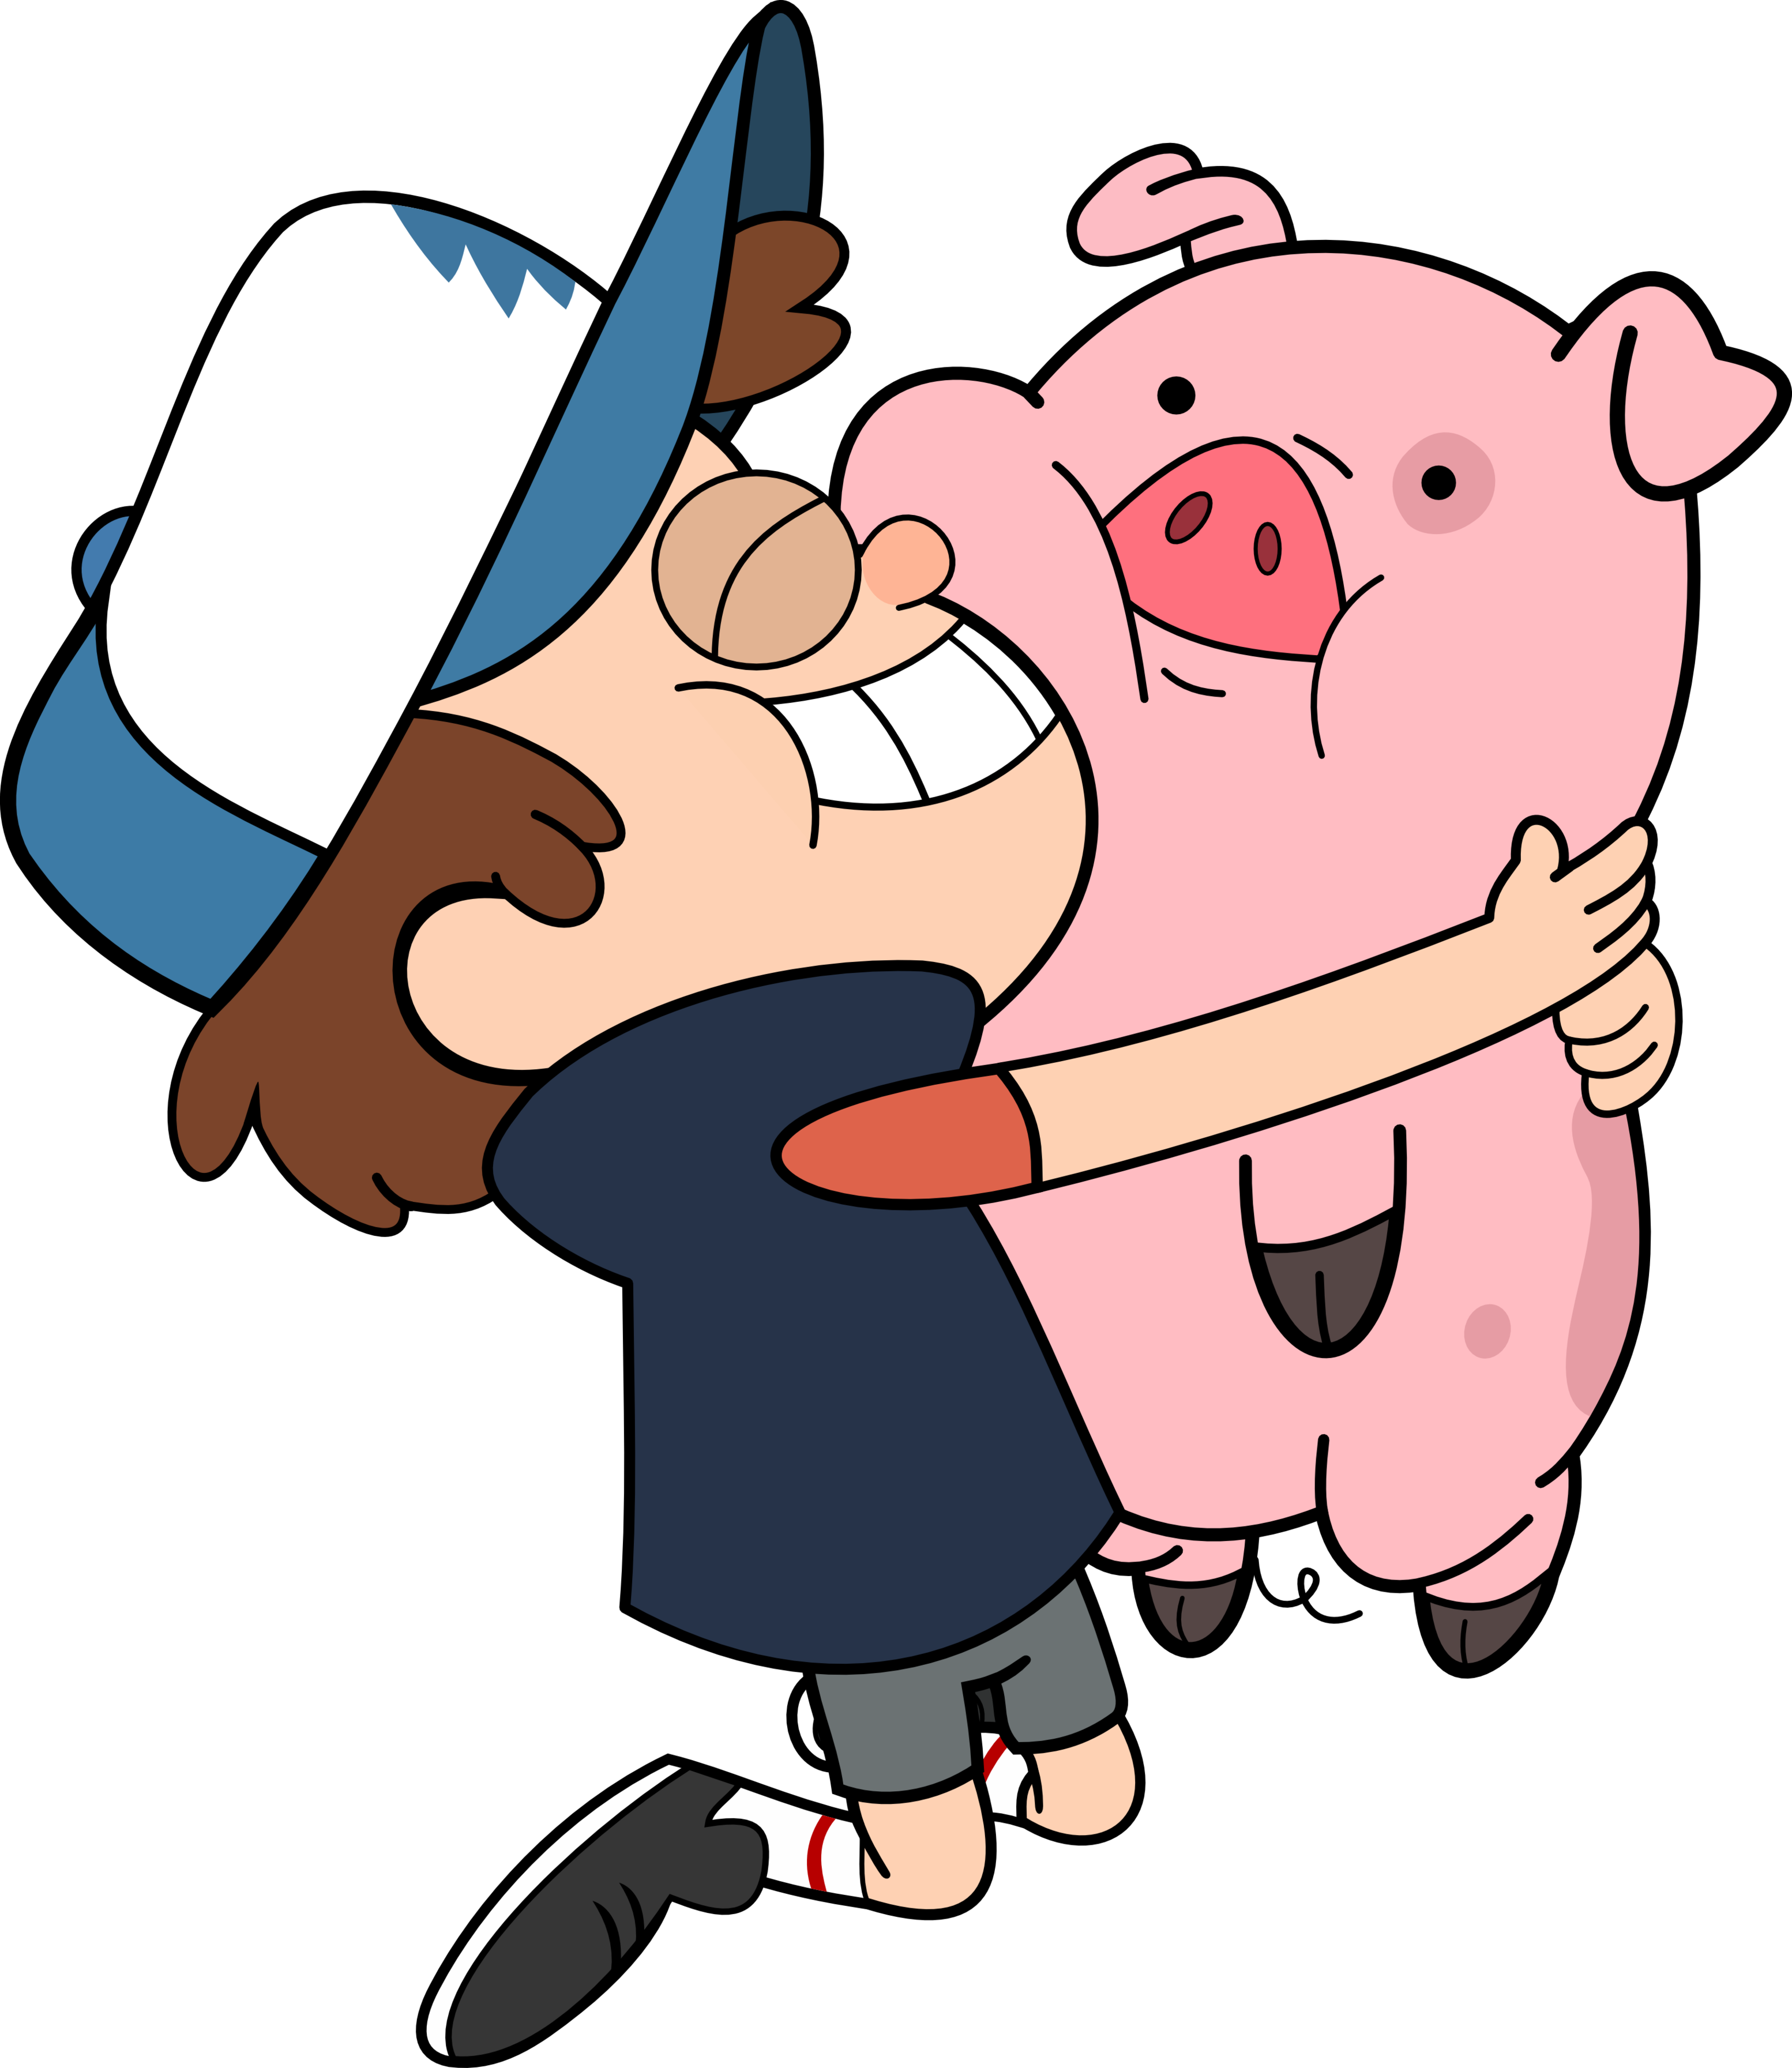 Mabel Pines Gravity Falls Wiki Clipart